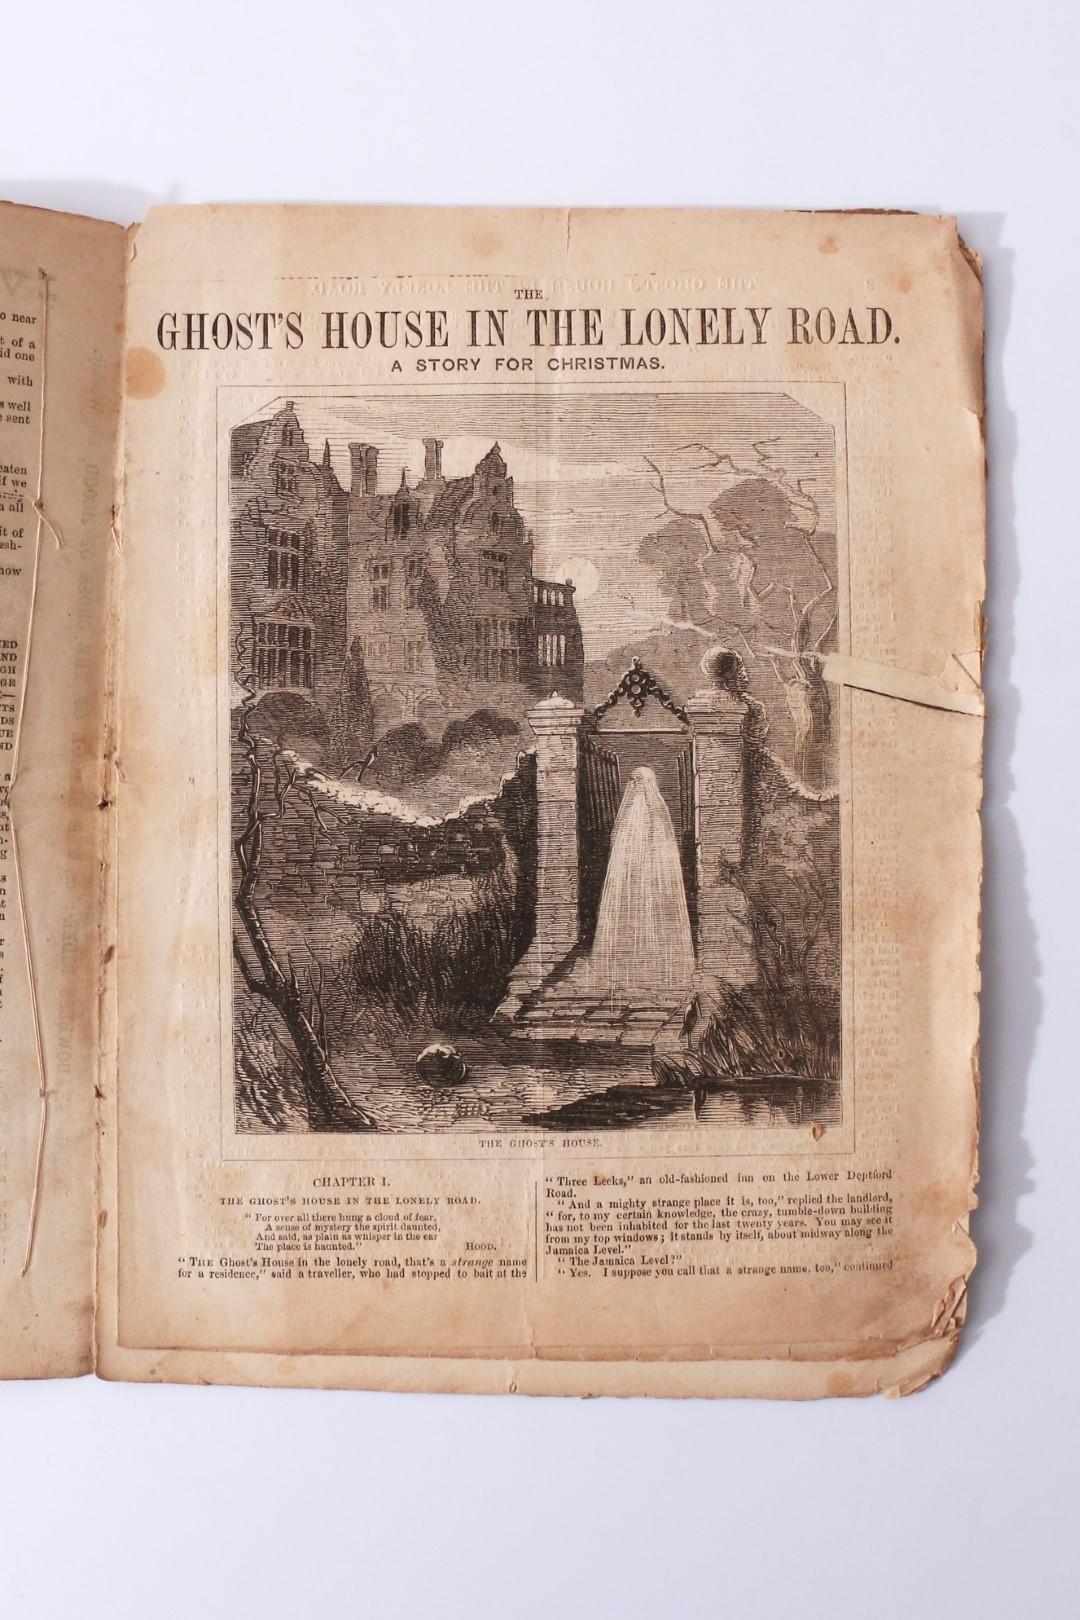 Anonymous - The Ghost's House in the Lonely Road - None, n.d. [1865], First Edition.